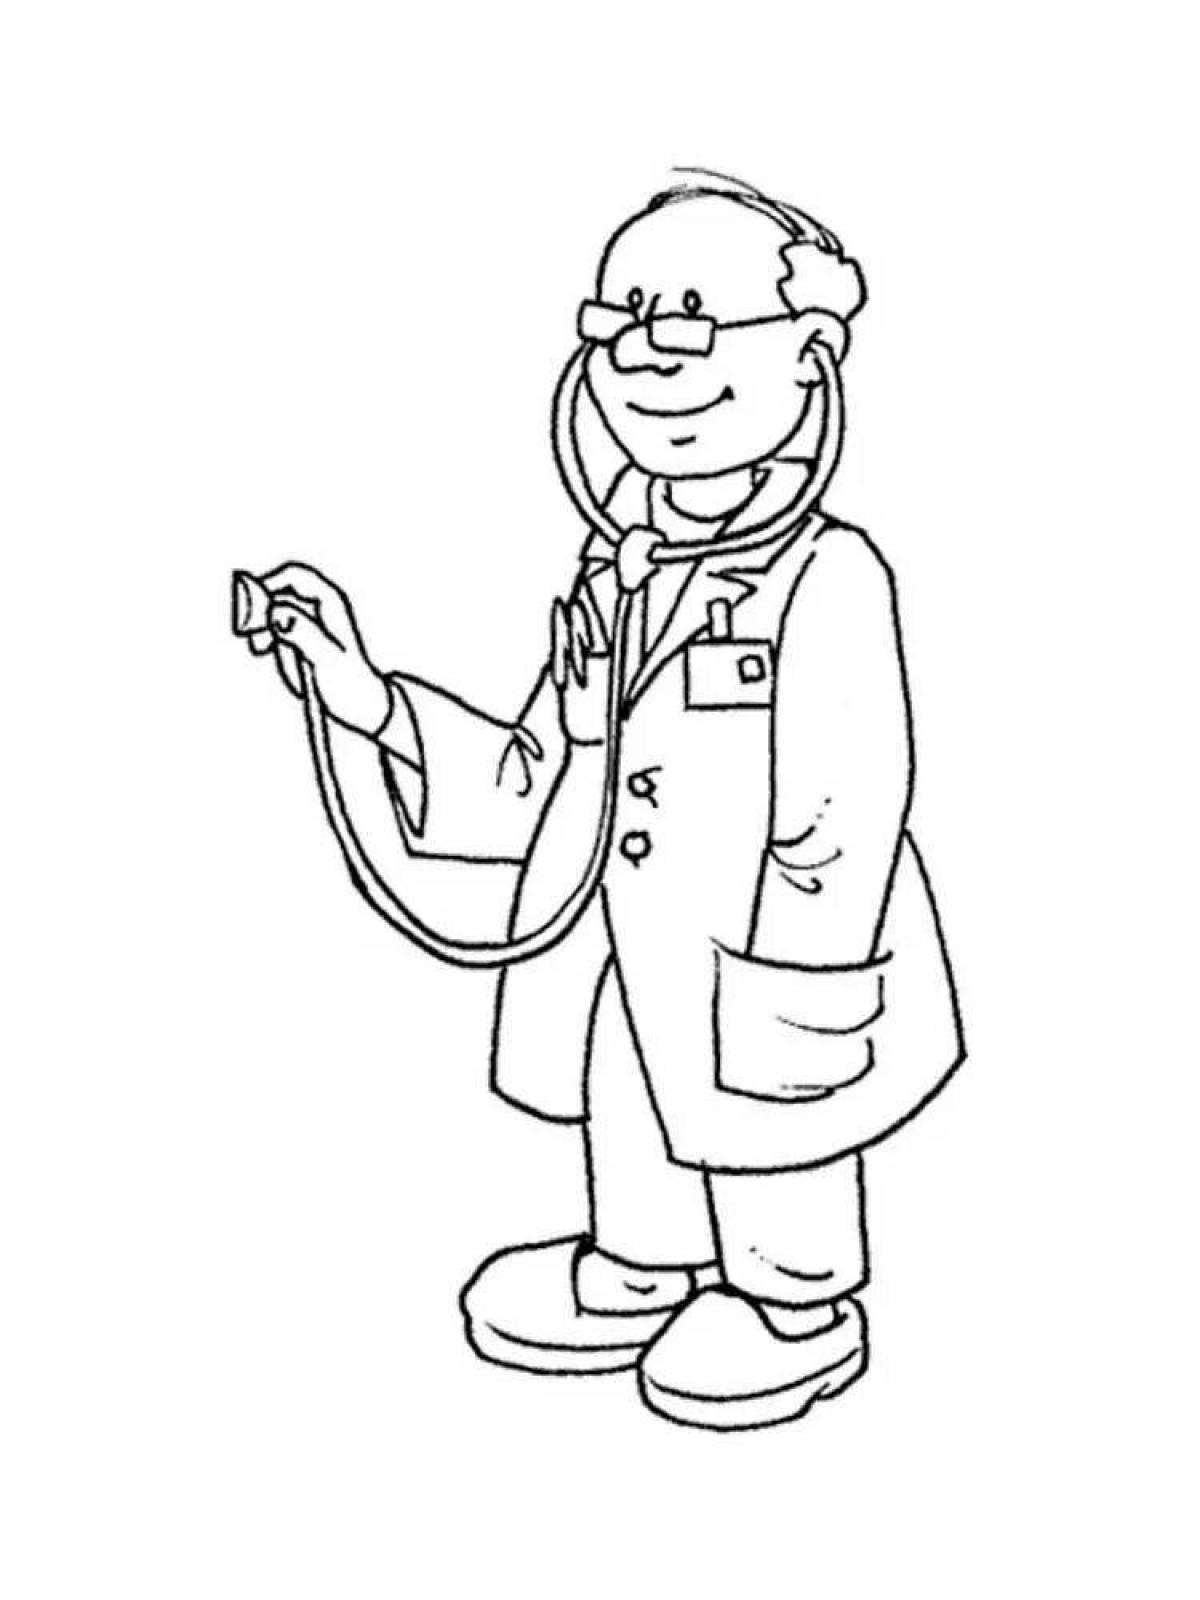 Charming doctor figurine coloring book